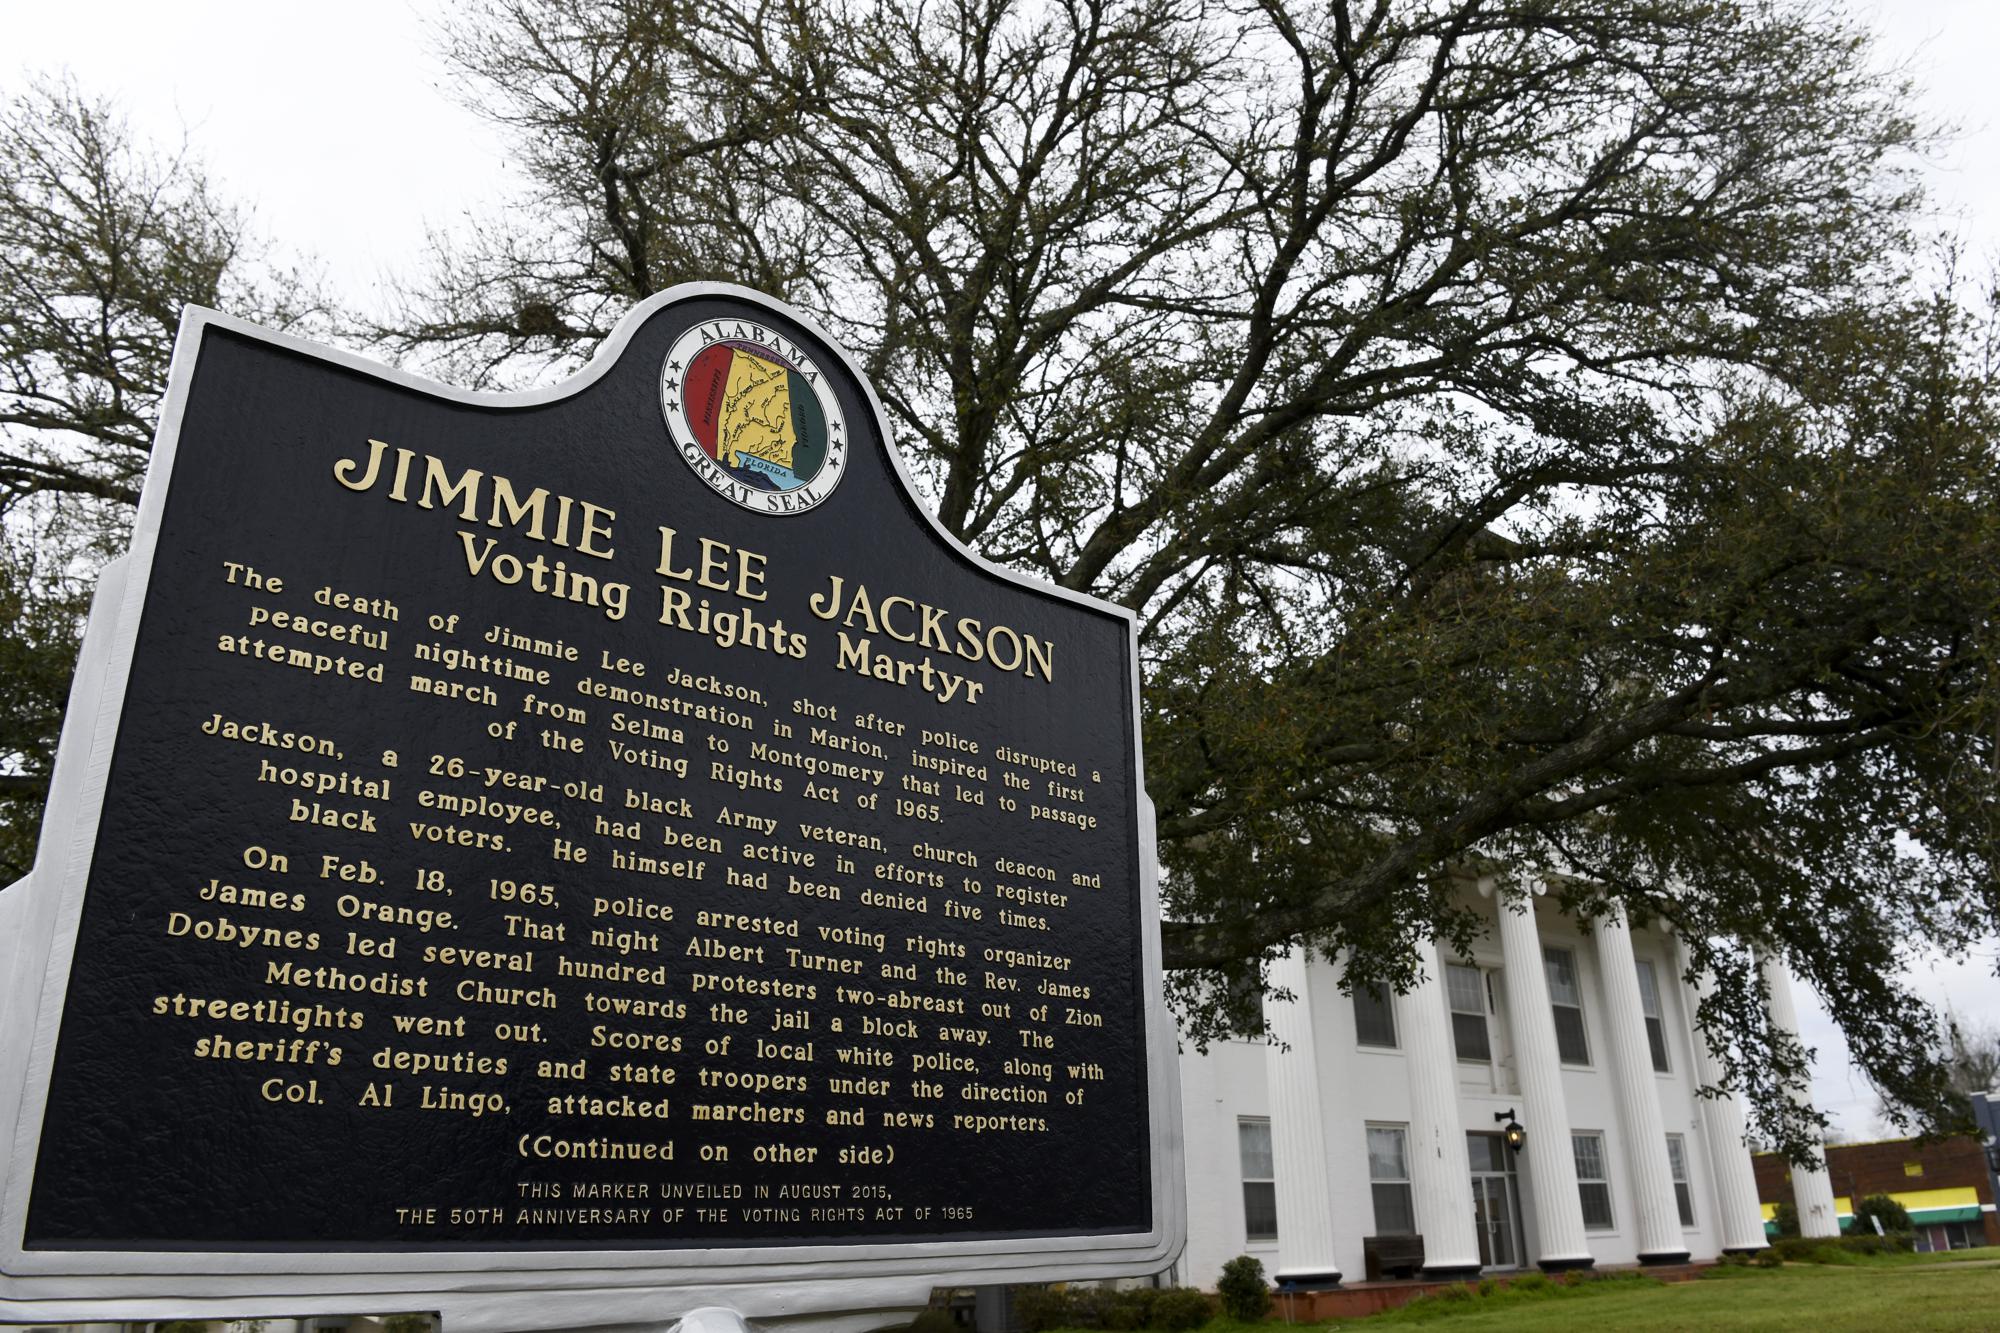 A historic marker honoring civil rights martyr Jimmie Lee Jackson near the Perry County Courthouse in Marion, Ala., on Feb. 16, 2020. Andrew Young, one of the last surviving members of Martin Luther King Jr.'s inner circle, recalled the journey to the signing of the Voting Rights Act as an arduous one, often marked by violence and bloodshed.(AP Photo/Julie Bennett, File)